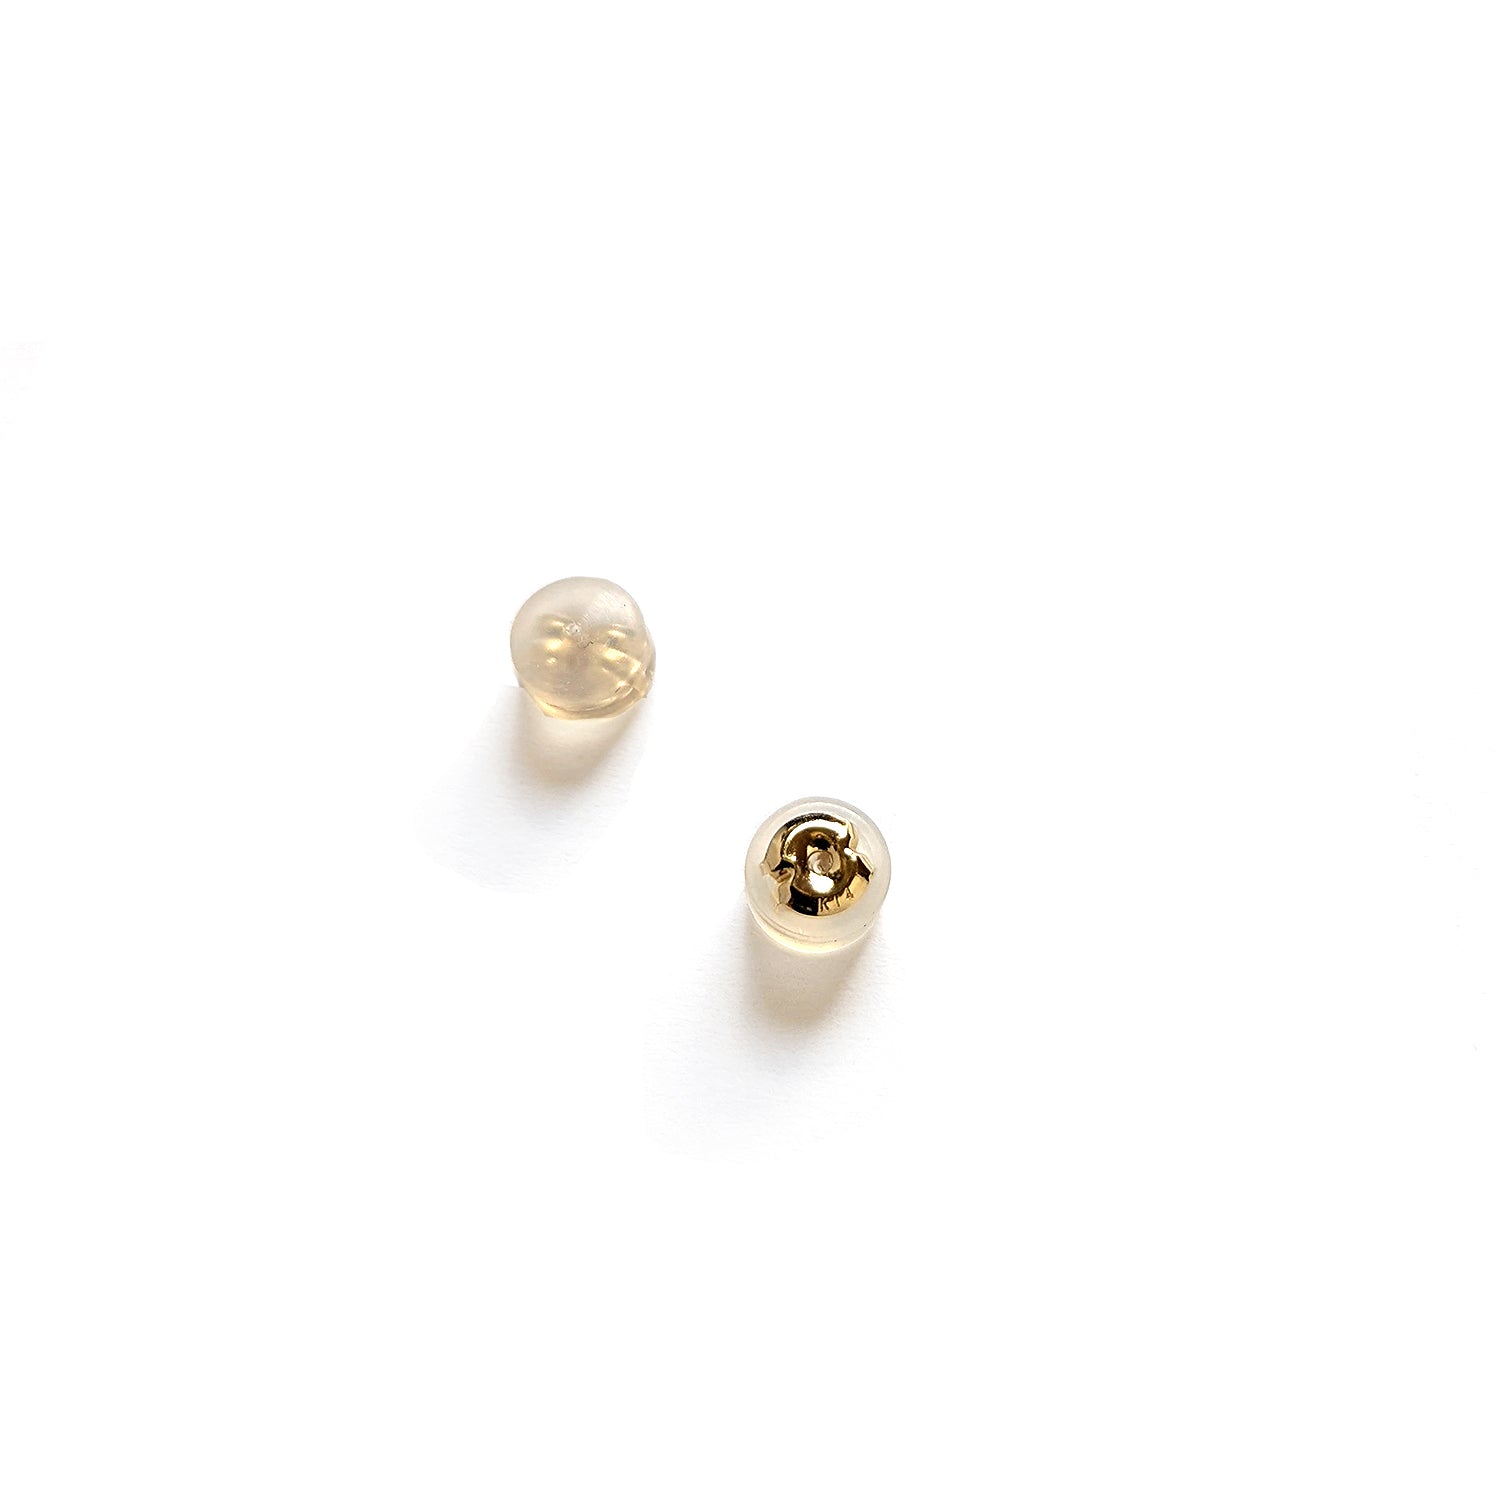 Golden Earring Backs with Silicone Pad Earring Studs, Studs with